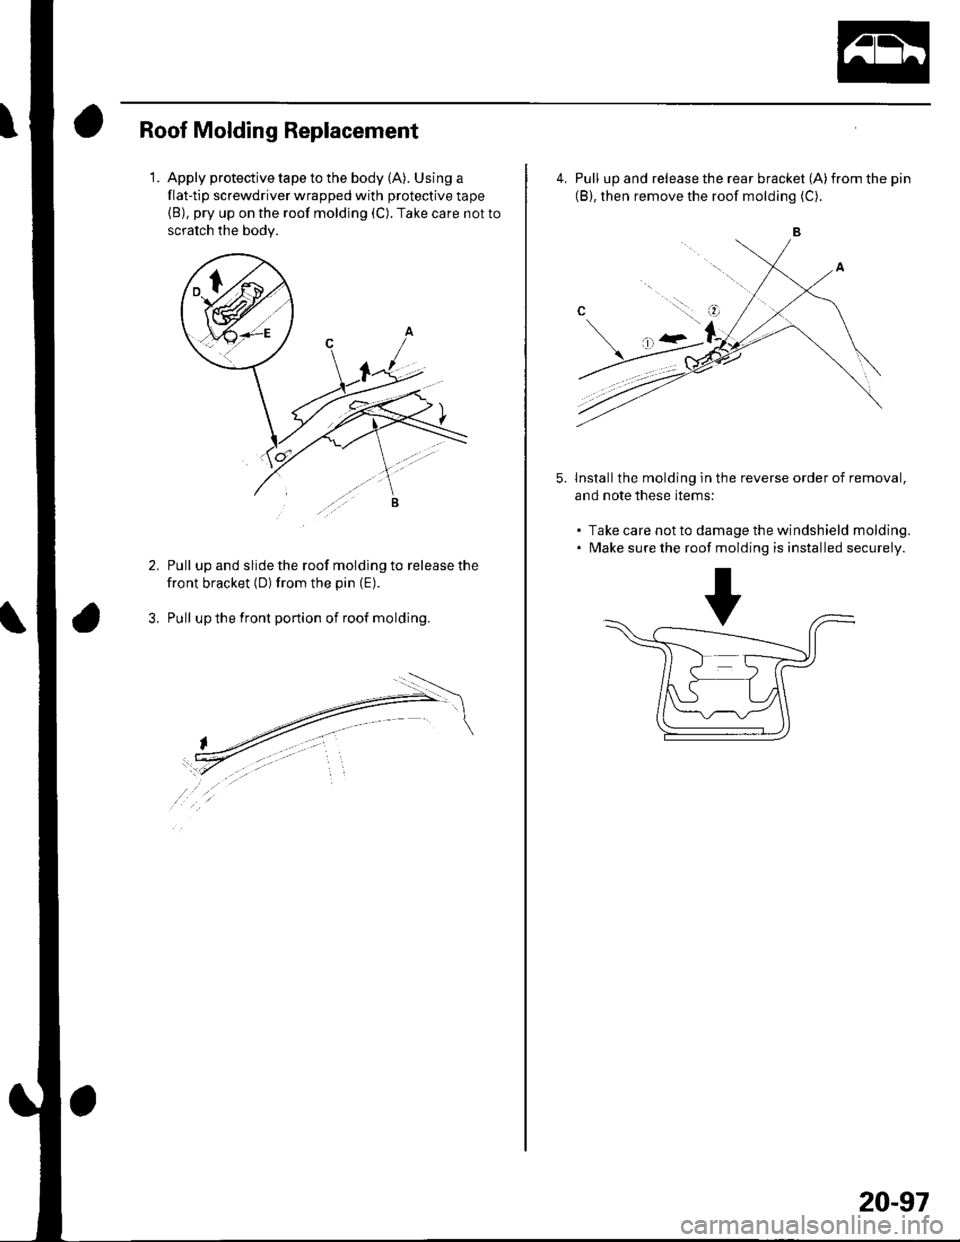 HONDA CIVIC 2003 7.G Workshop Manual 1.
Roof Molding Replacement
Apply protective tape to the body (A). Using a
flat-tip screwdriver wrapped with protective tape(B), pry up on the roof molding (C). Take care not to
scratch the bodv.
Pull